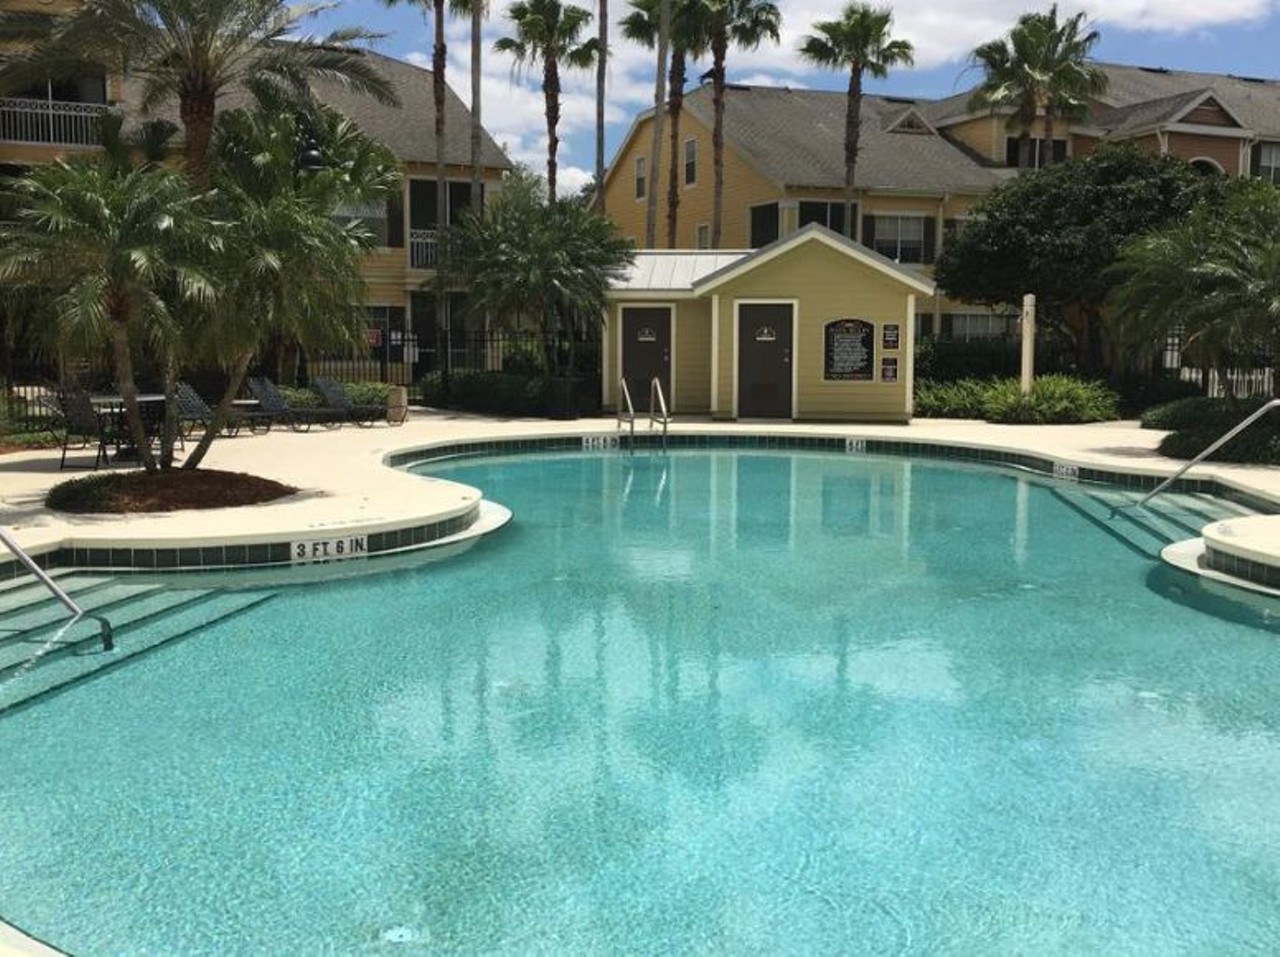 City St, Orlando
$1,225/mo
1 bed, 1 bath, 829 sqft
Located near the Mall of Millenia, this place is new, updated and spacious. It's also only a small commute to the downtown area and close to plenty of shopping centers. Living here is like almost like living at a resort with a restaurant, five pools, 24 hour guards and a ton of other amenities.